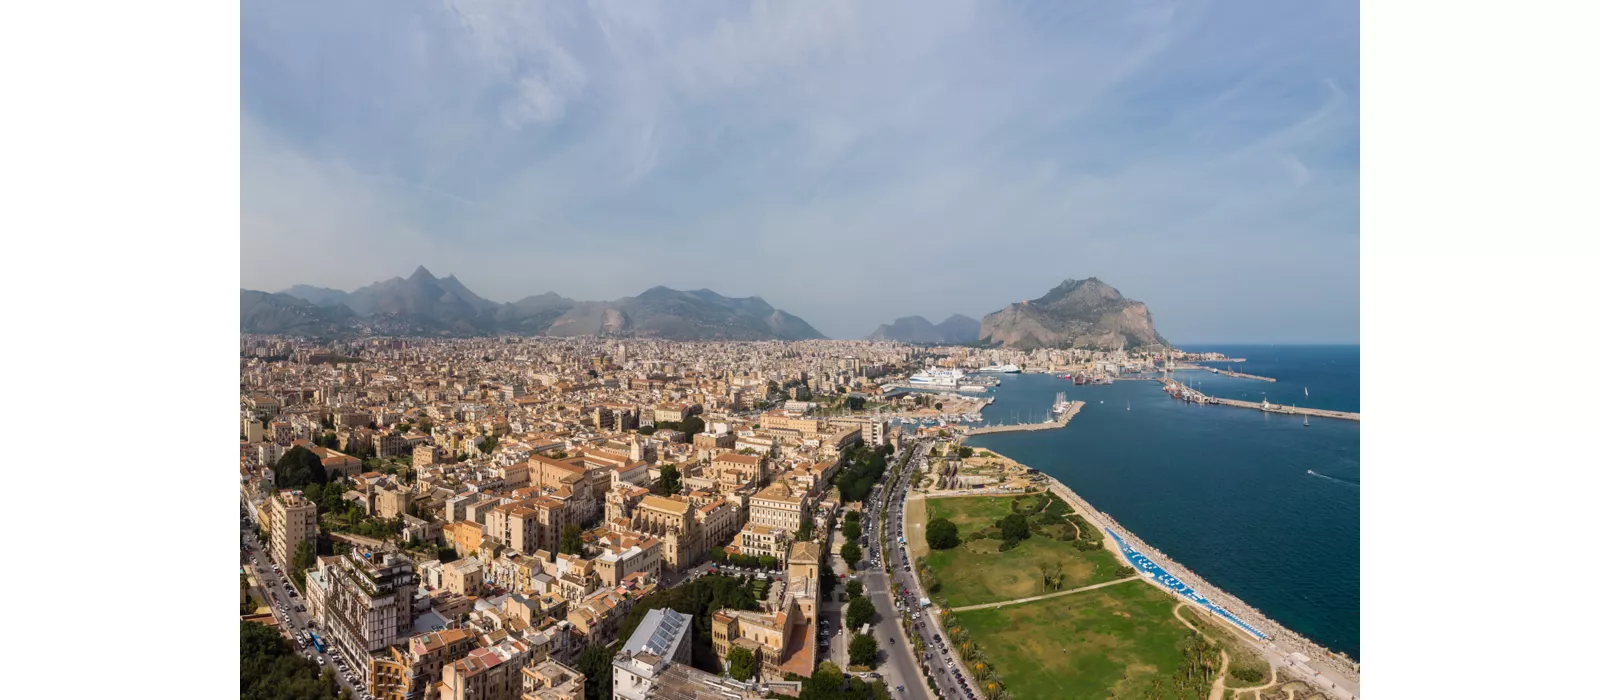 Palermo, the waterfront and the port